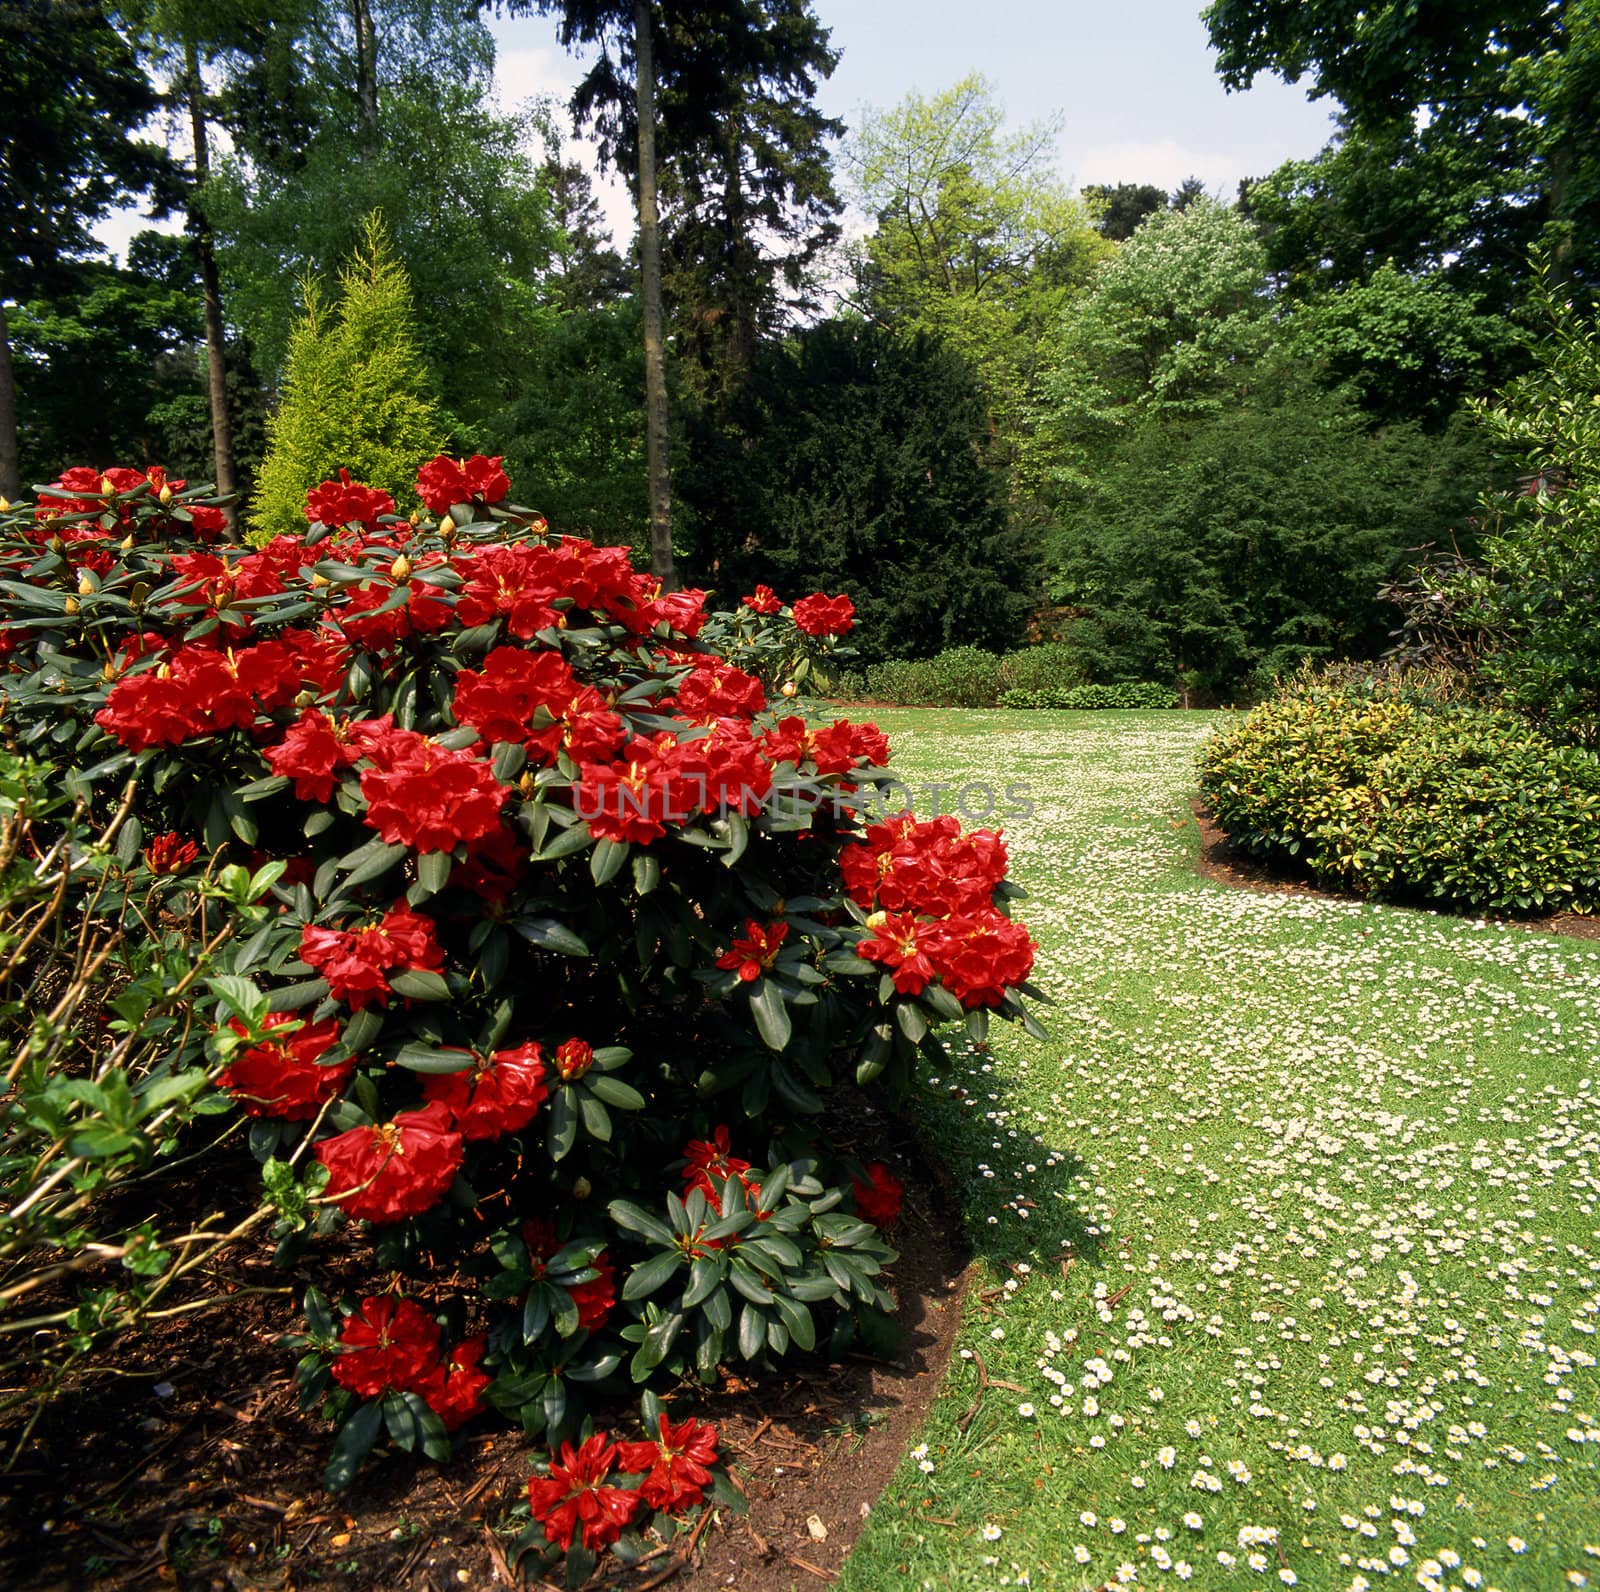 Formal garden with a red Rhodendrum bush in foreground